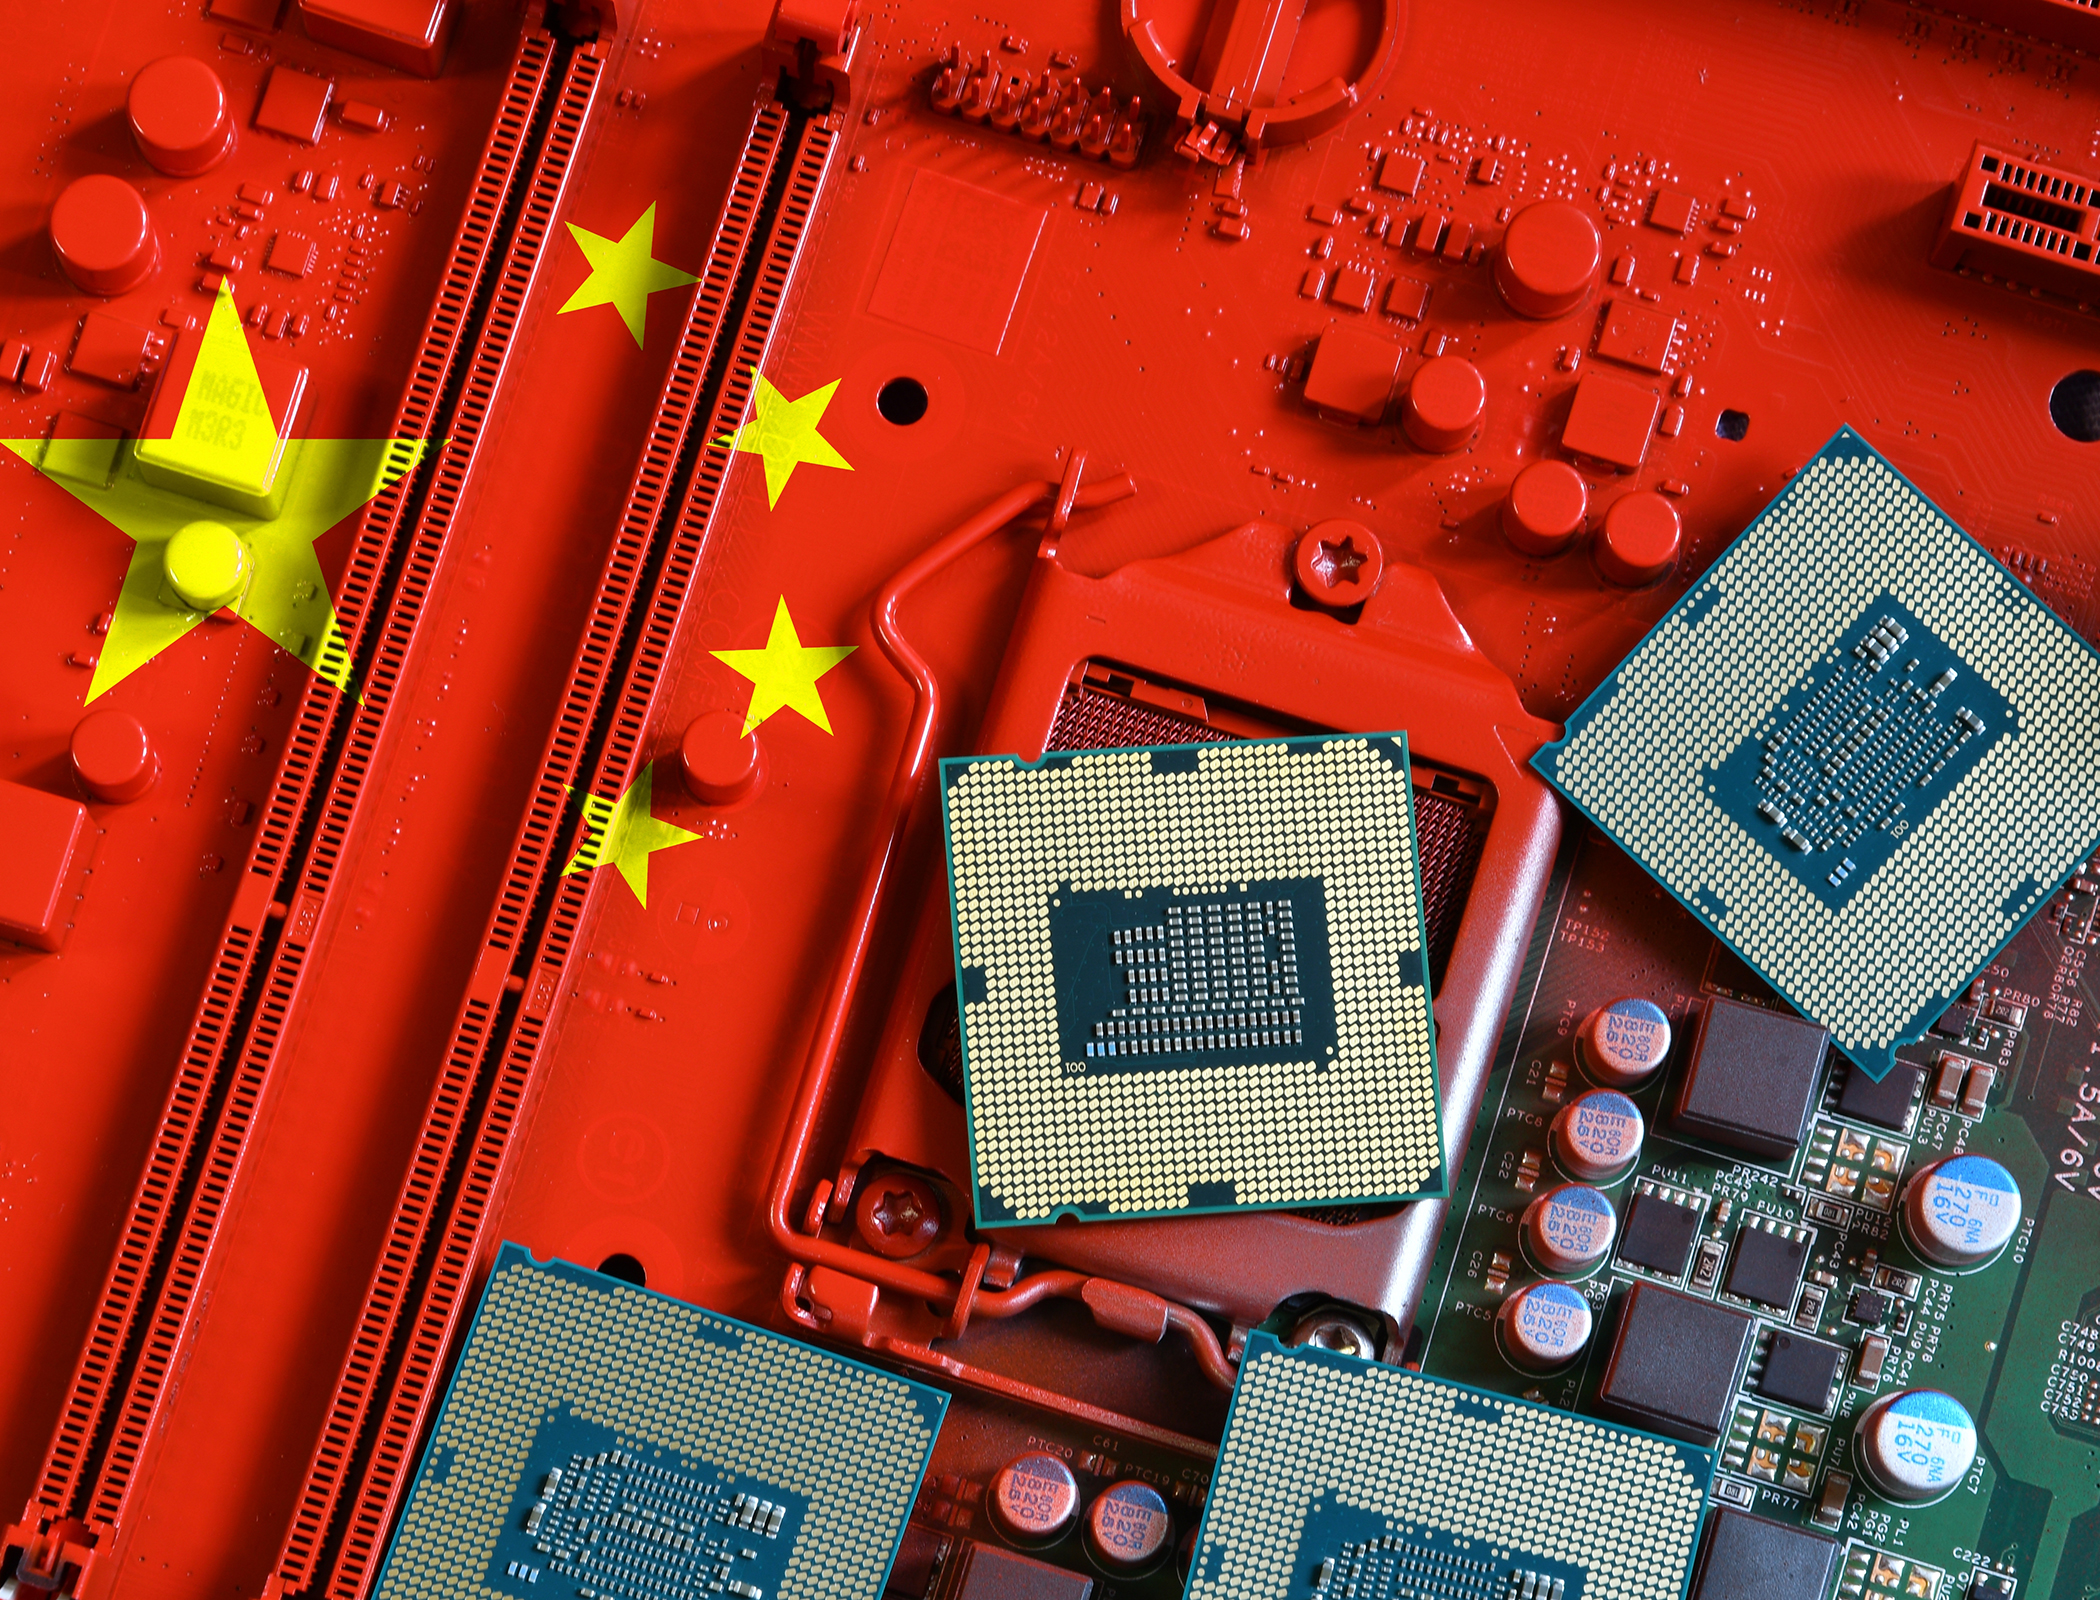 China targets $40bn chip investment – reports